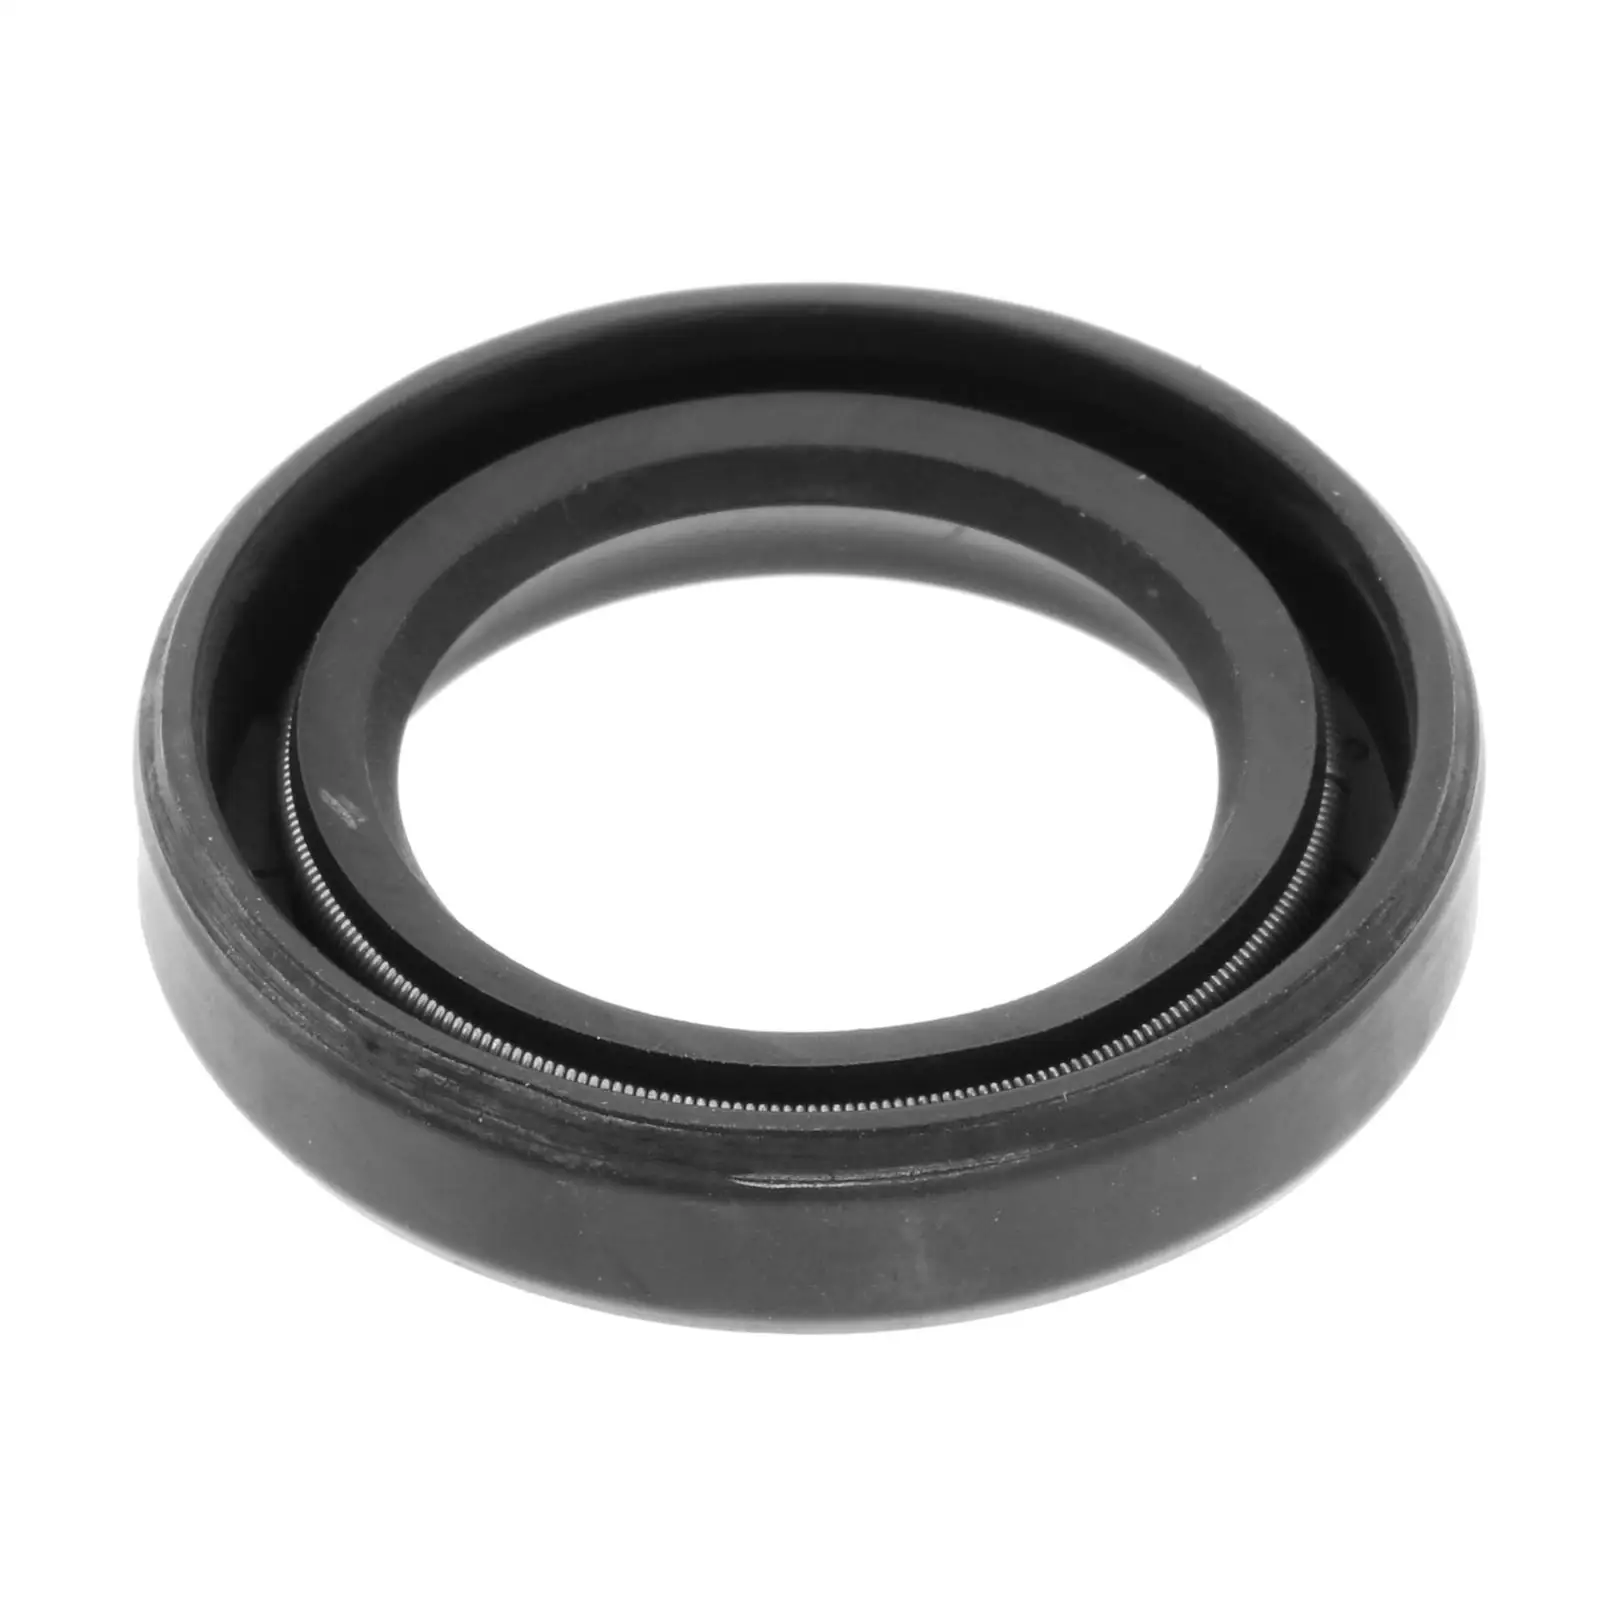 Oil Seal S-type Motocycle Accessory Replacements Parts for Yamaha Outboard